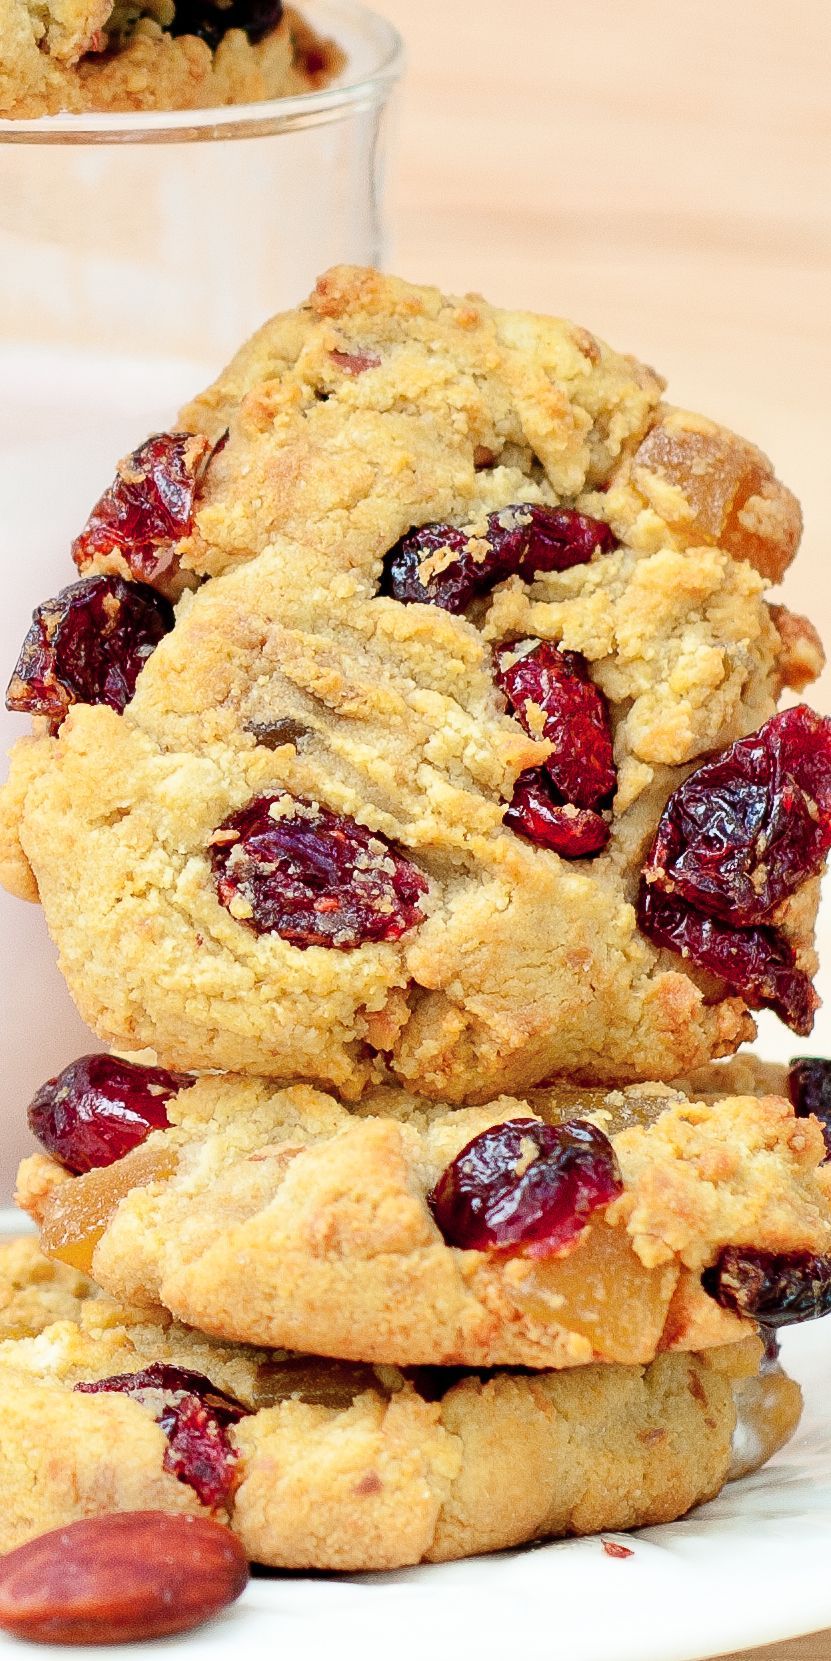 Gluten Free Almond Flour Cookies with Cranberries -   17 desserts No Bake maple syrup ideas